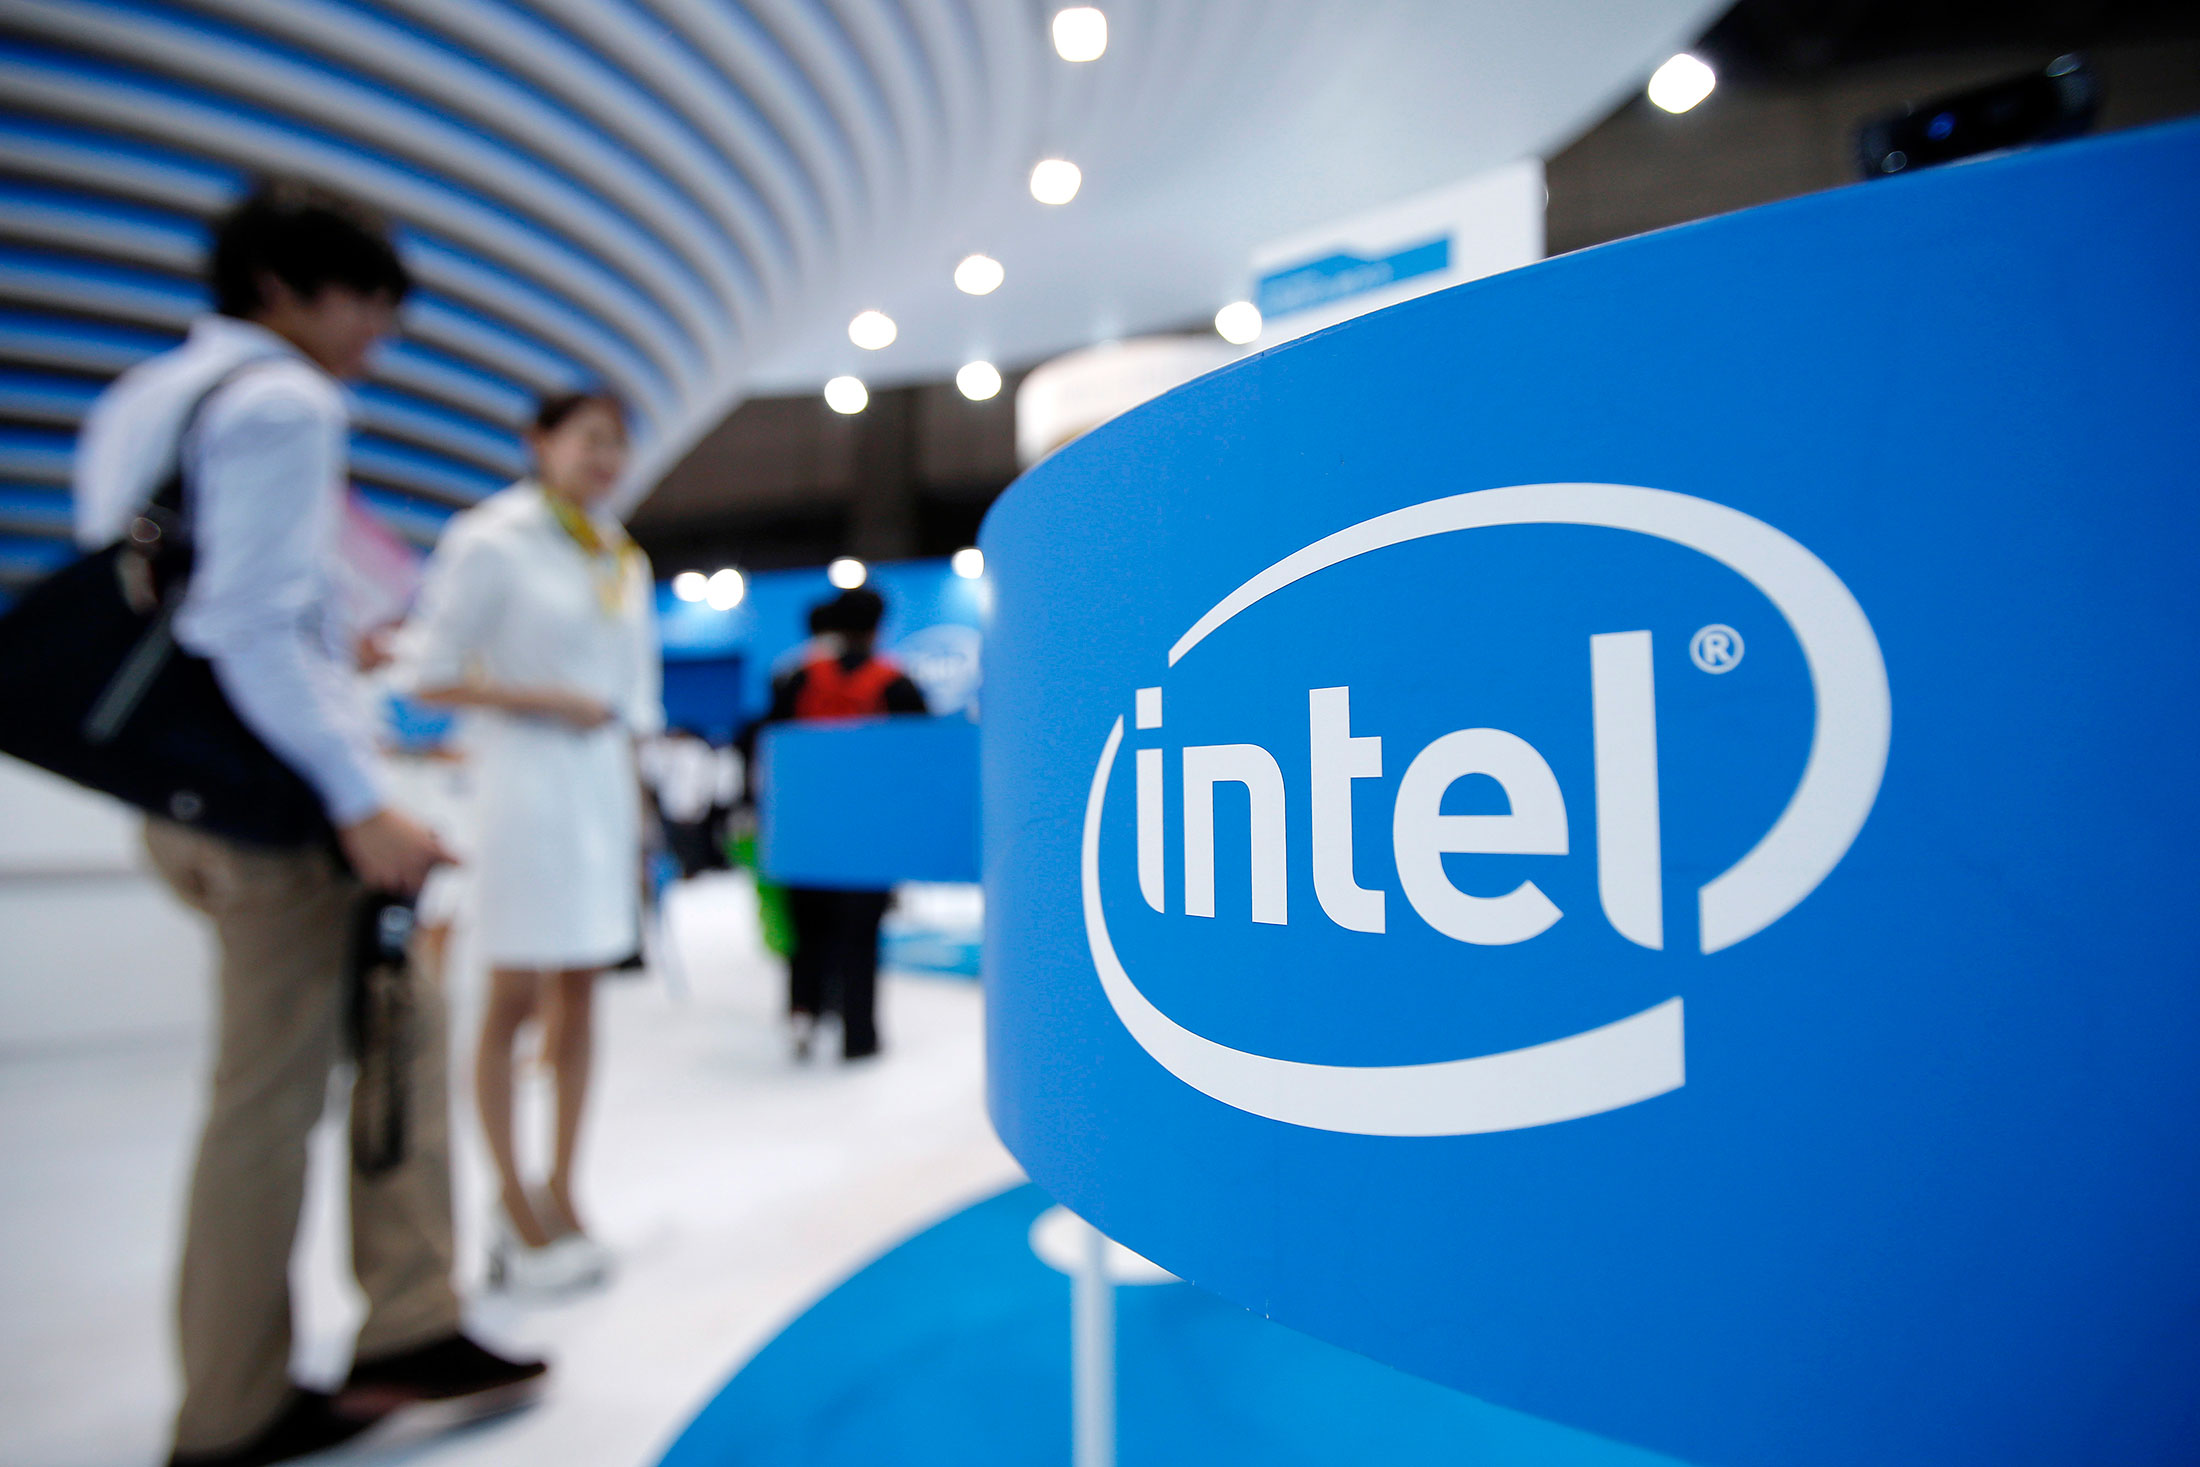 The Intel Corp. booth at the CEATEC Japan 2013 exhibition in Chiba City.
